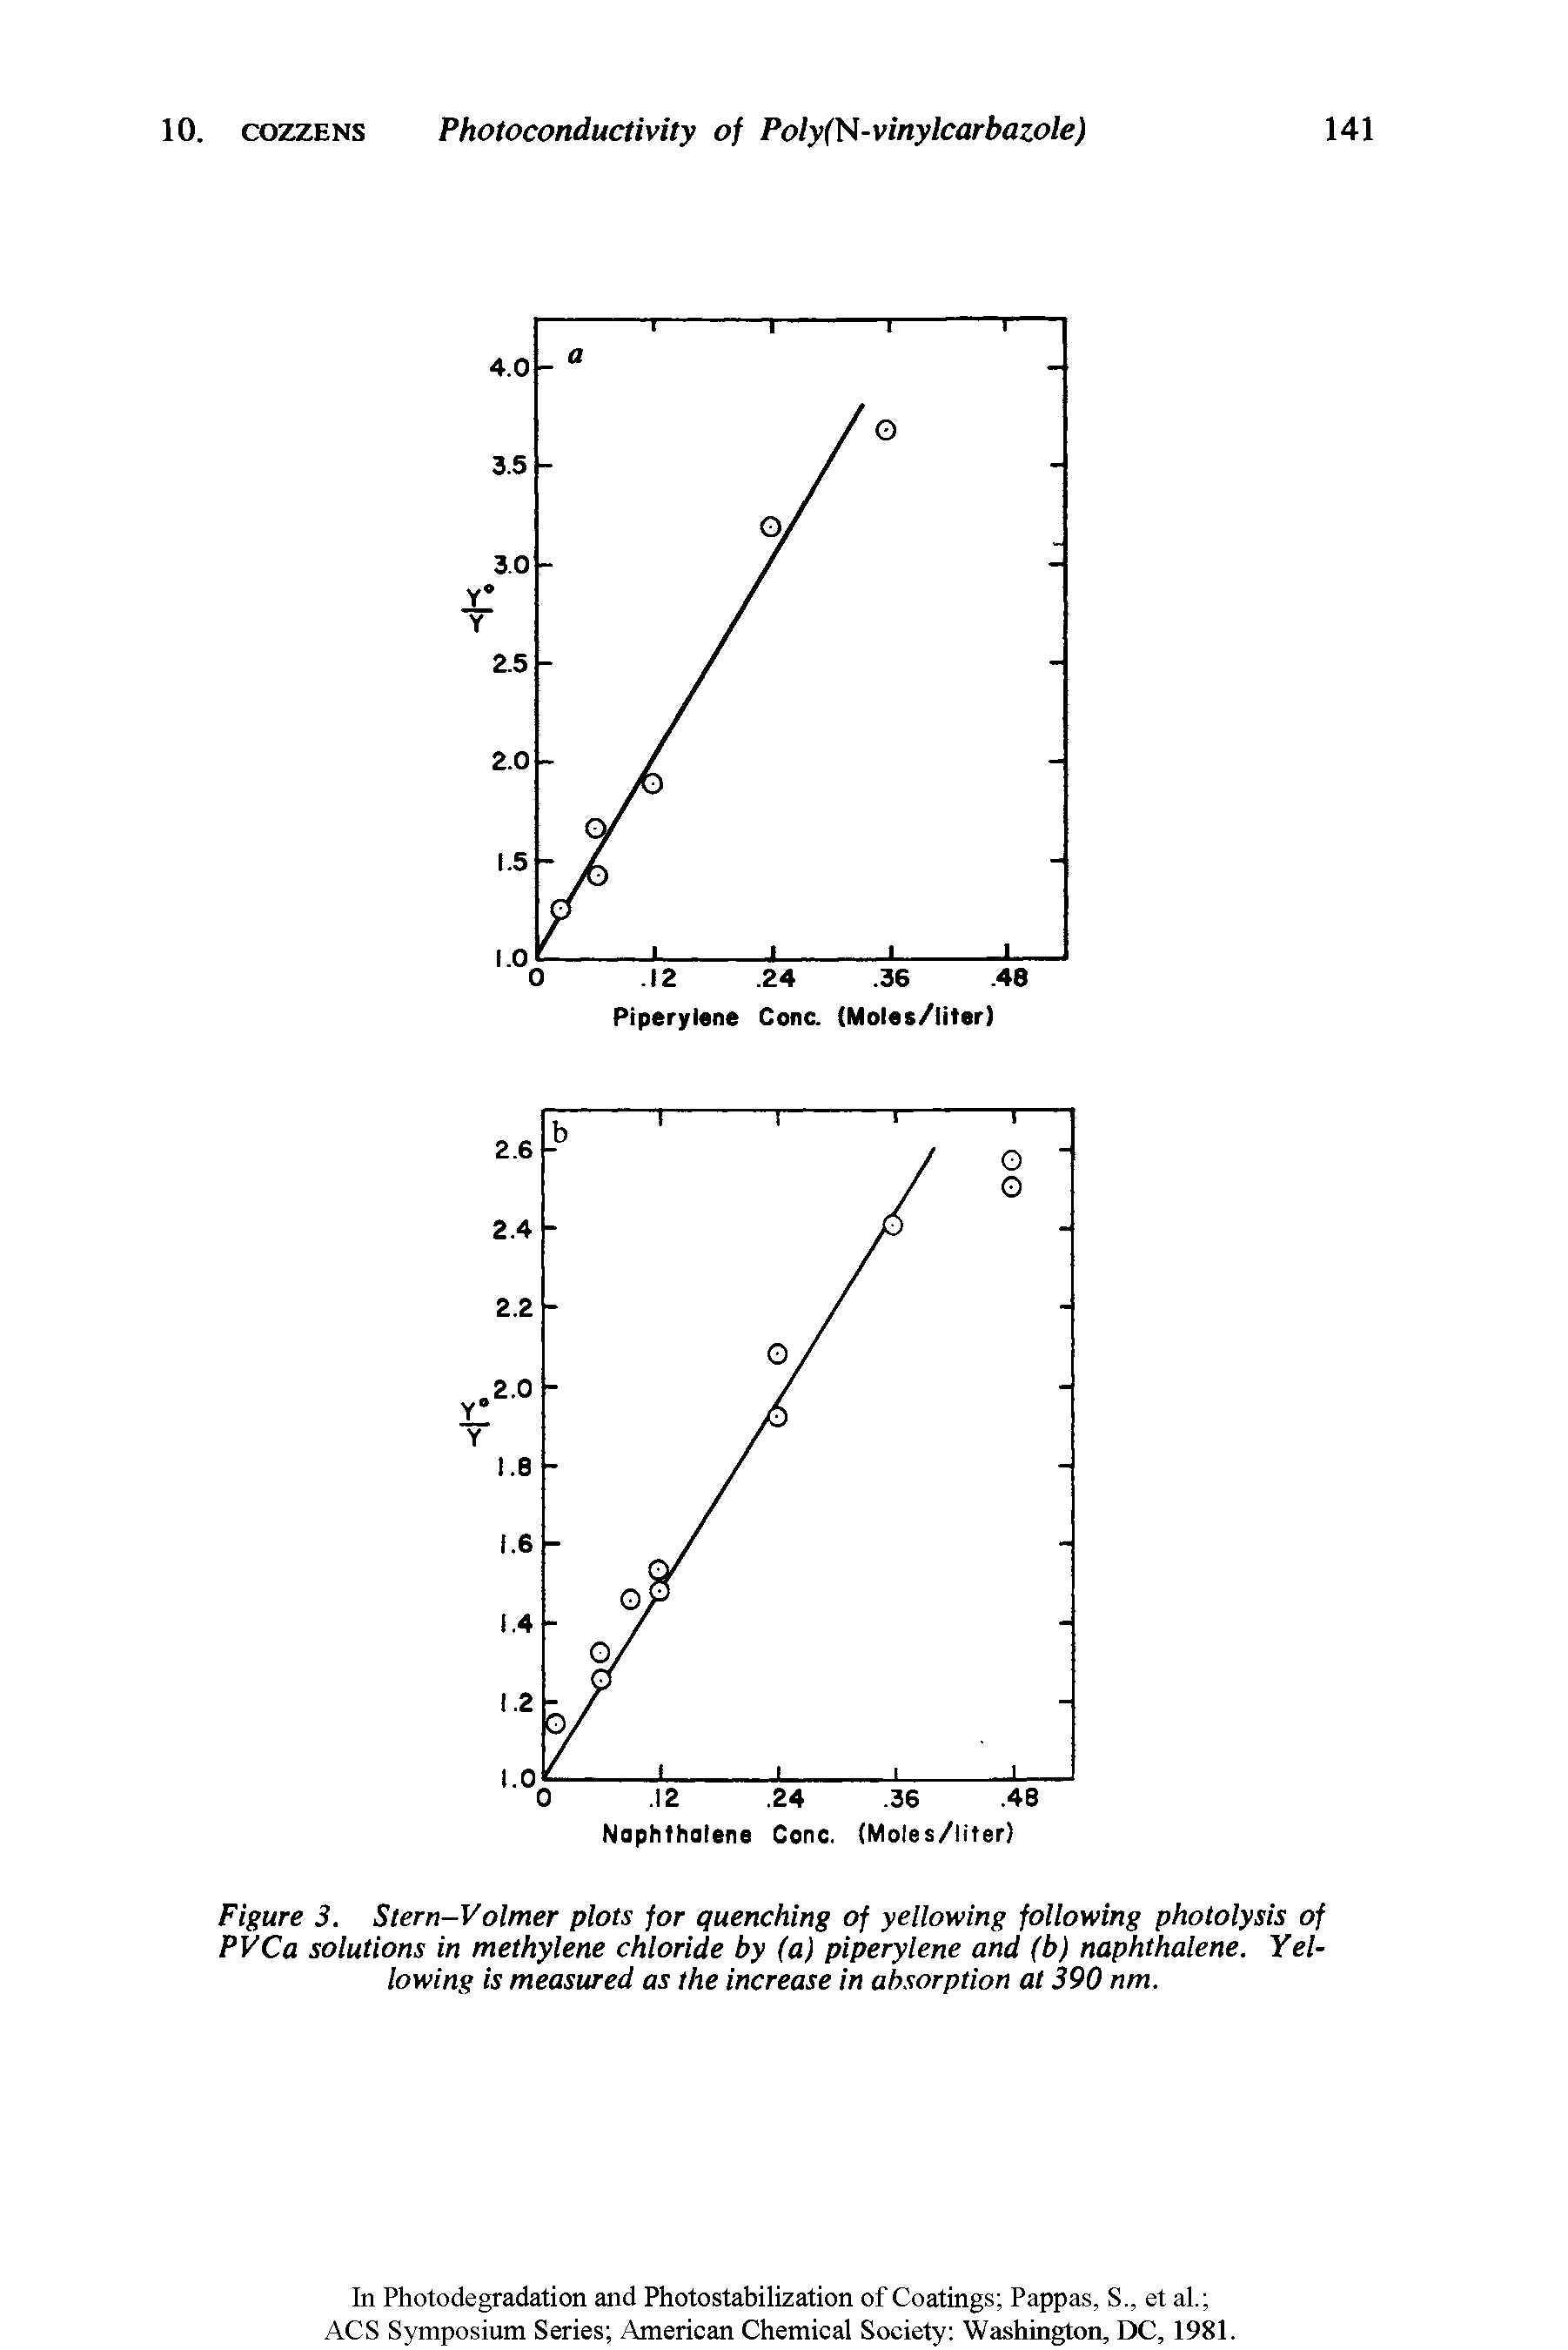 Figure 3. Stern-Volmer plots for quenching of yellowing following photolysis of PVCa solutions in methylene chloride by (a) piperylene and (b) naphthalene. Yellowing is measured as the increase in absorption at 390 nm.